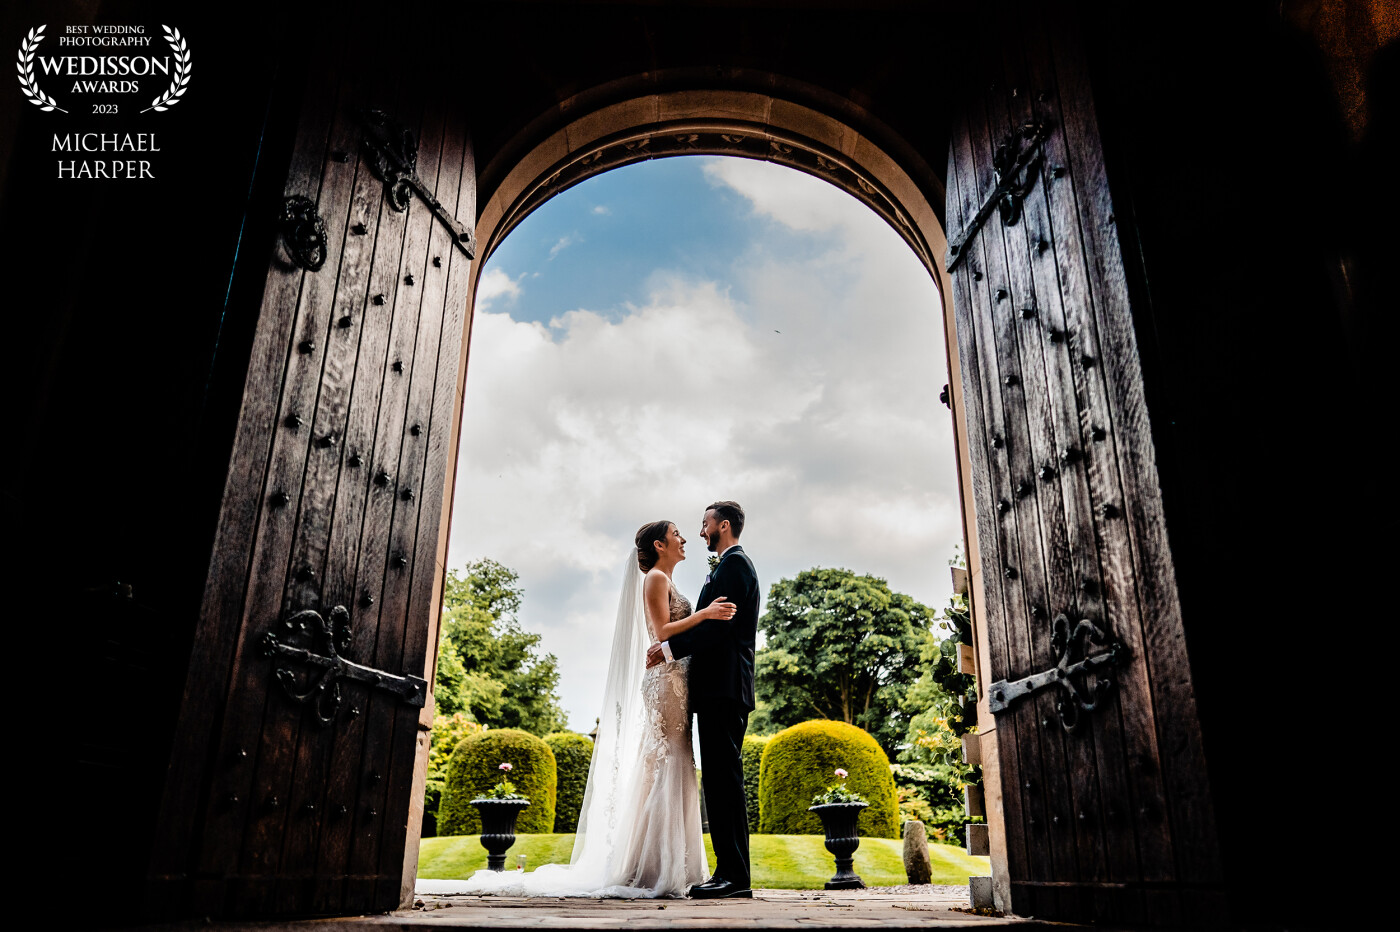 There was something about those doors which caught our eye so towards the end of the couple pictures we go low and went wide to use the character and shape of the doors to frame the couple.